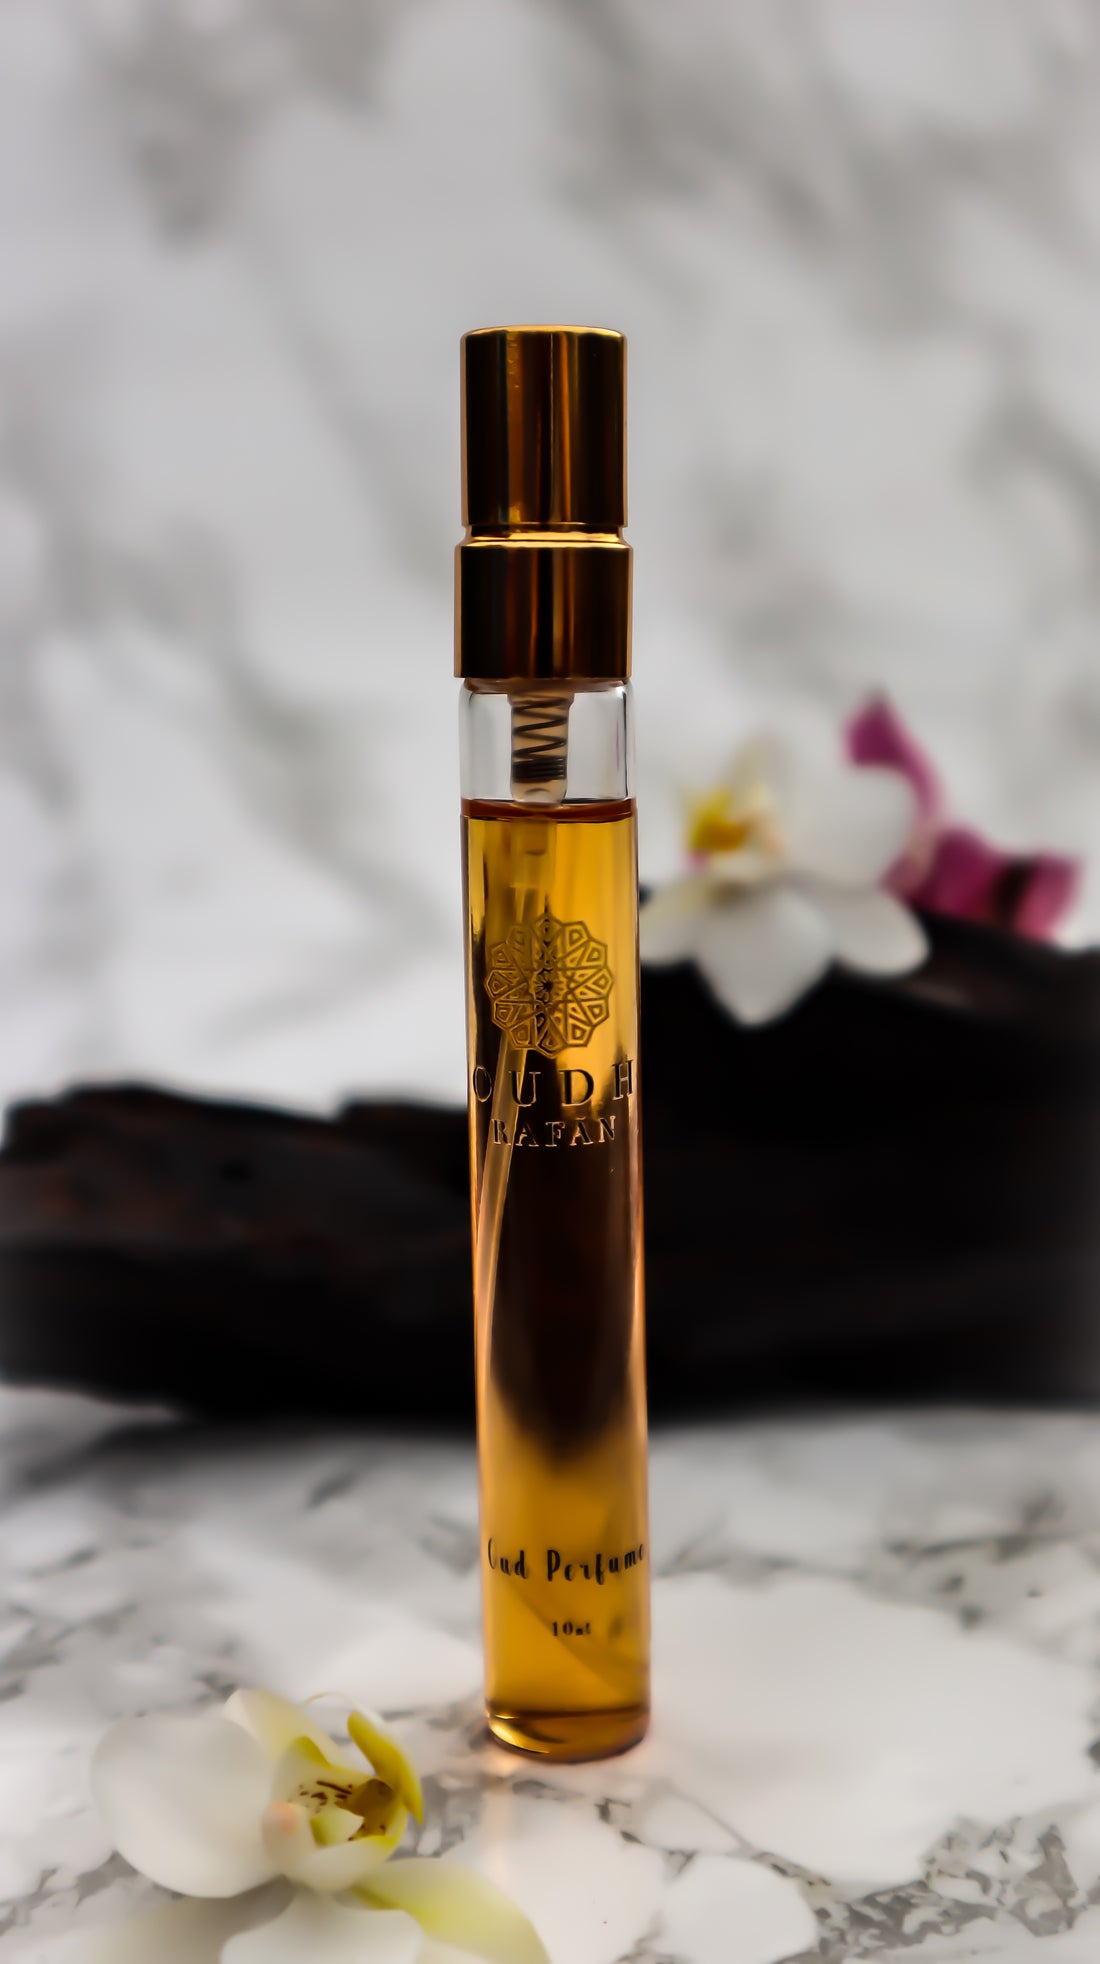 Isfahan - Luxury perfume in discovery size bottle 10ml - Florals, Oud, Orchid